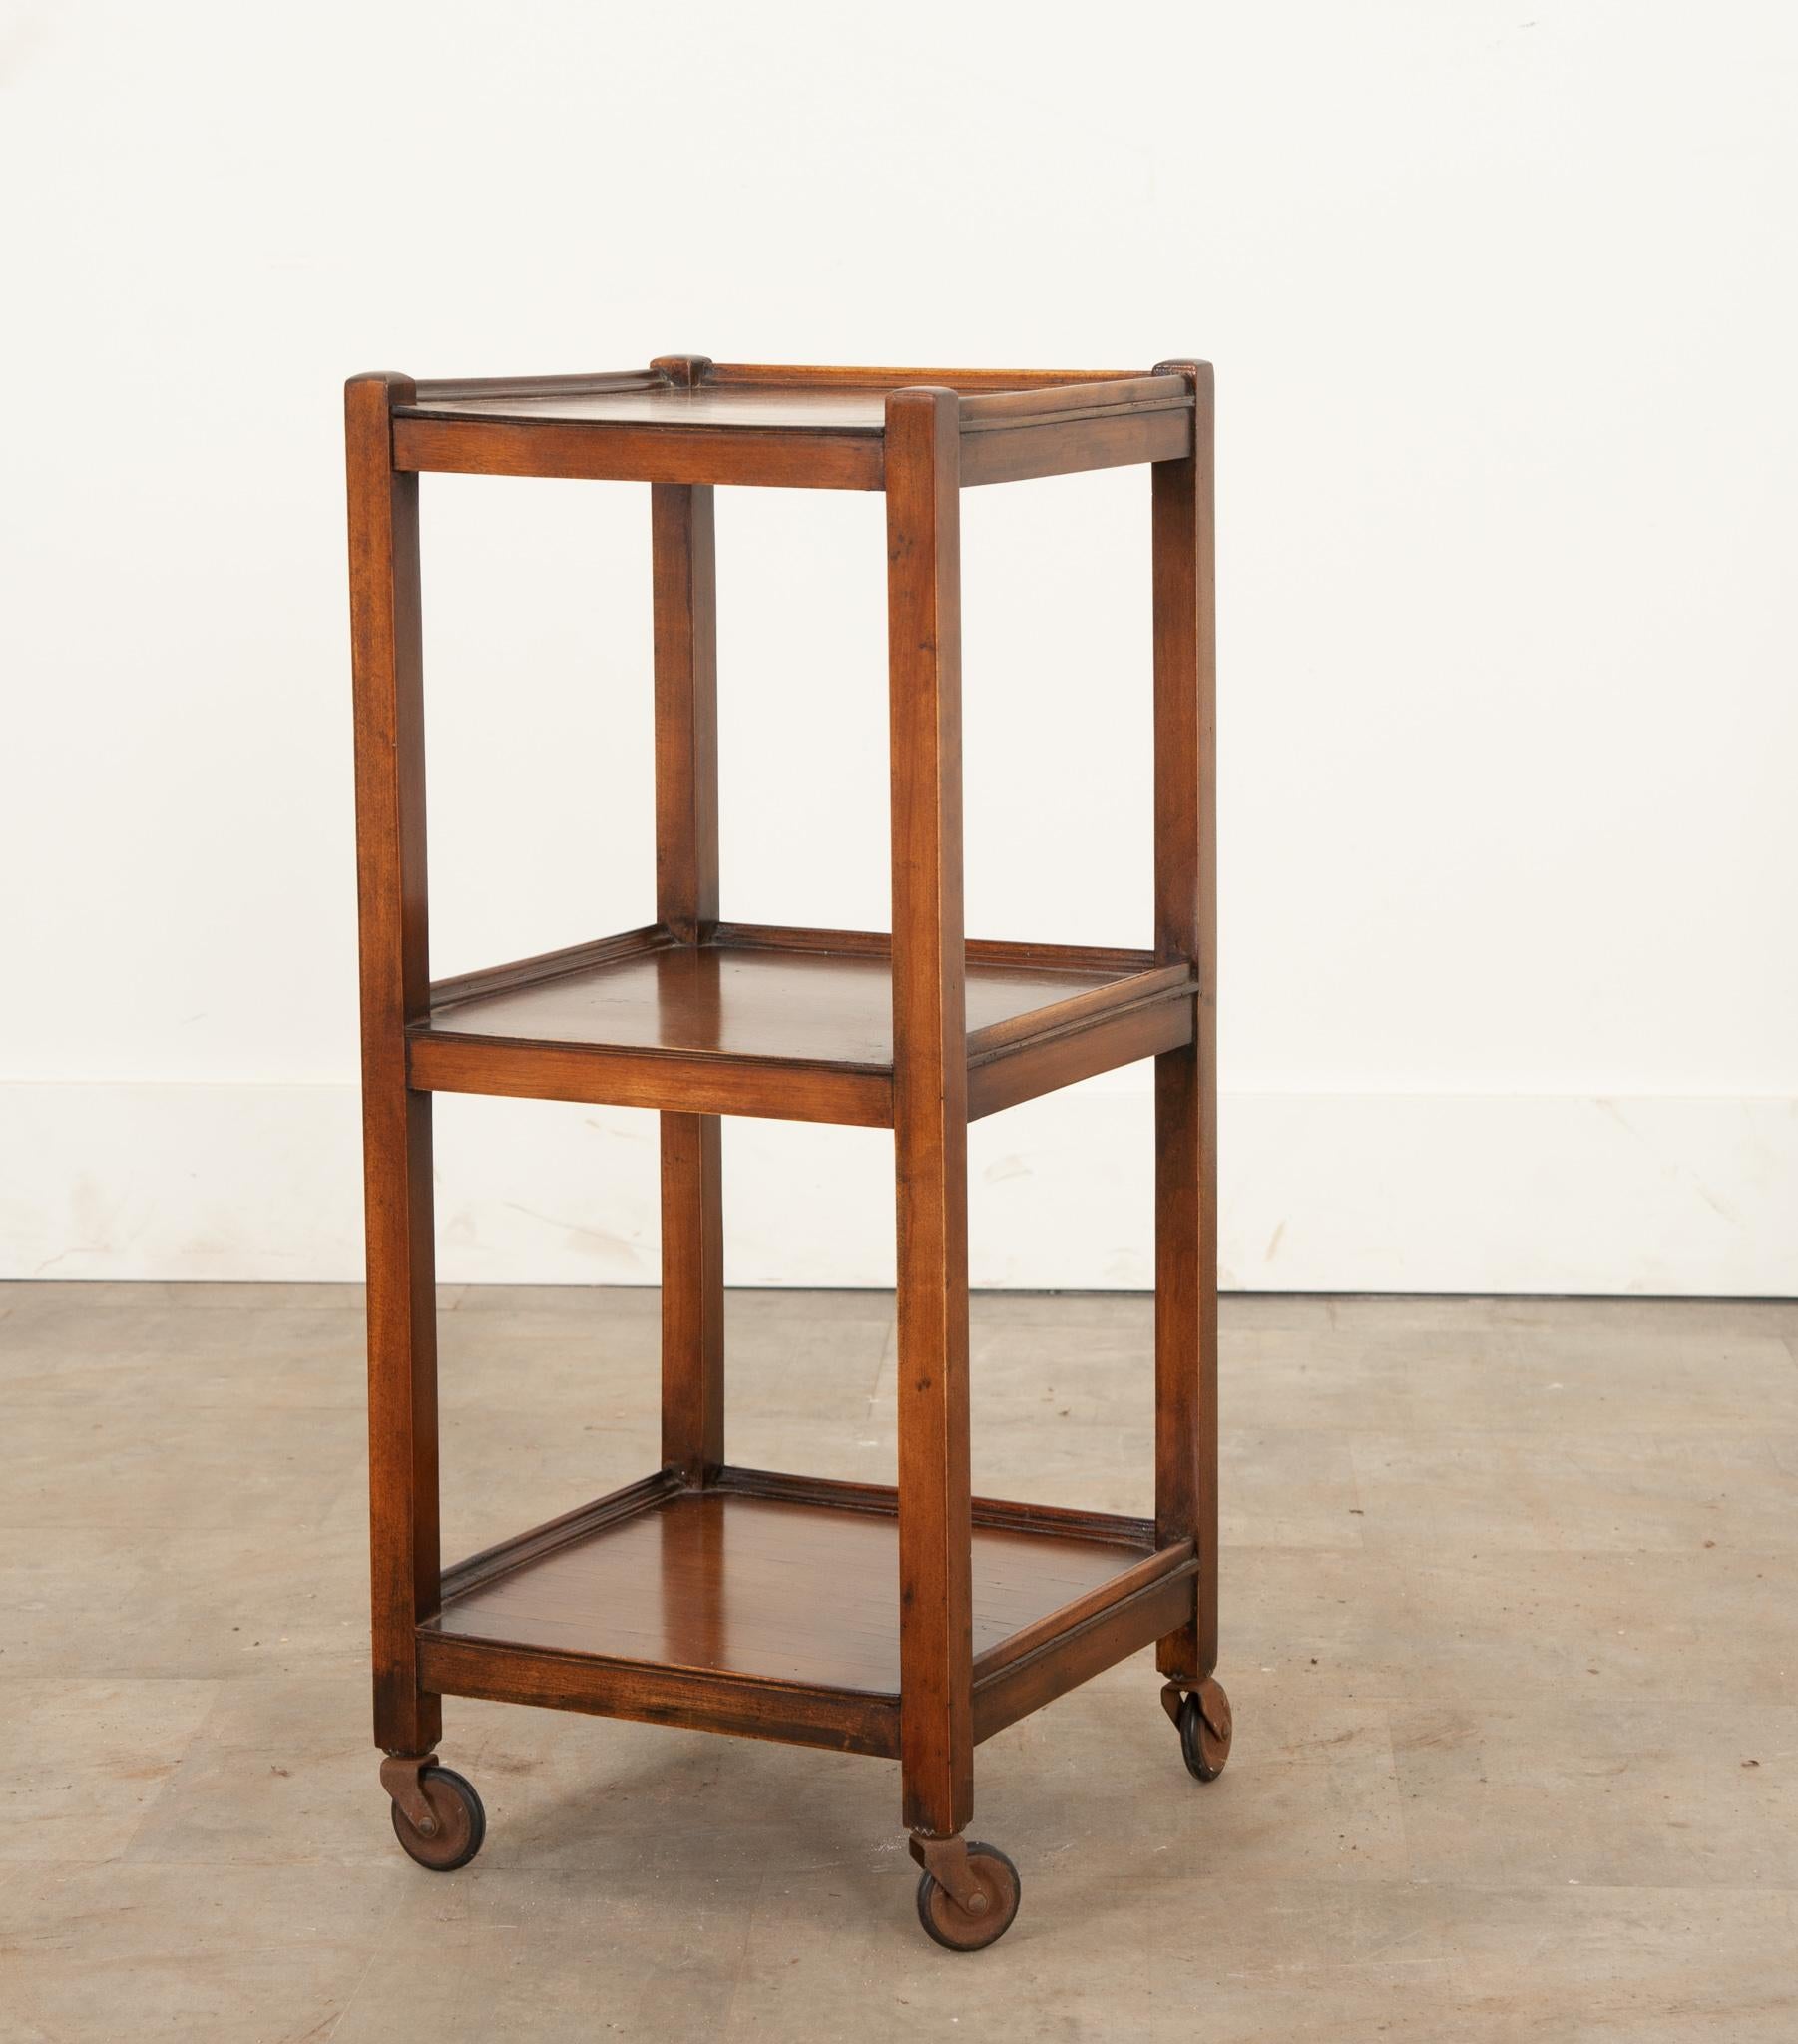 A darling petite etagere from England, crafted during the 1800’s from solid walnut. Three tiers each have a three-quarter gallery connected to square upright supports. Featuring its original casters, it has the ability to turn 360 degrees. Great for